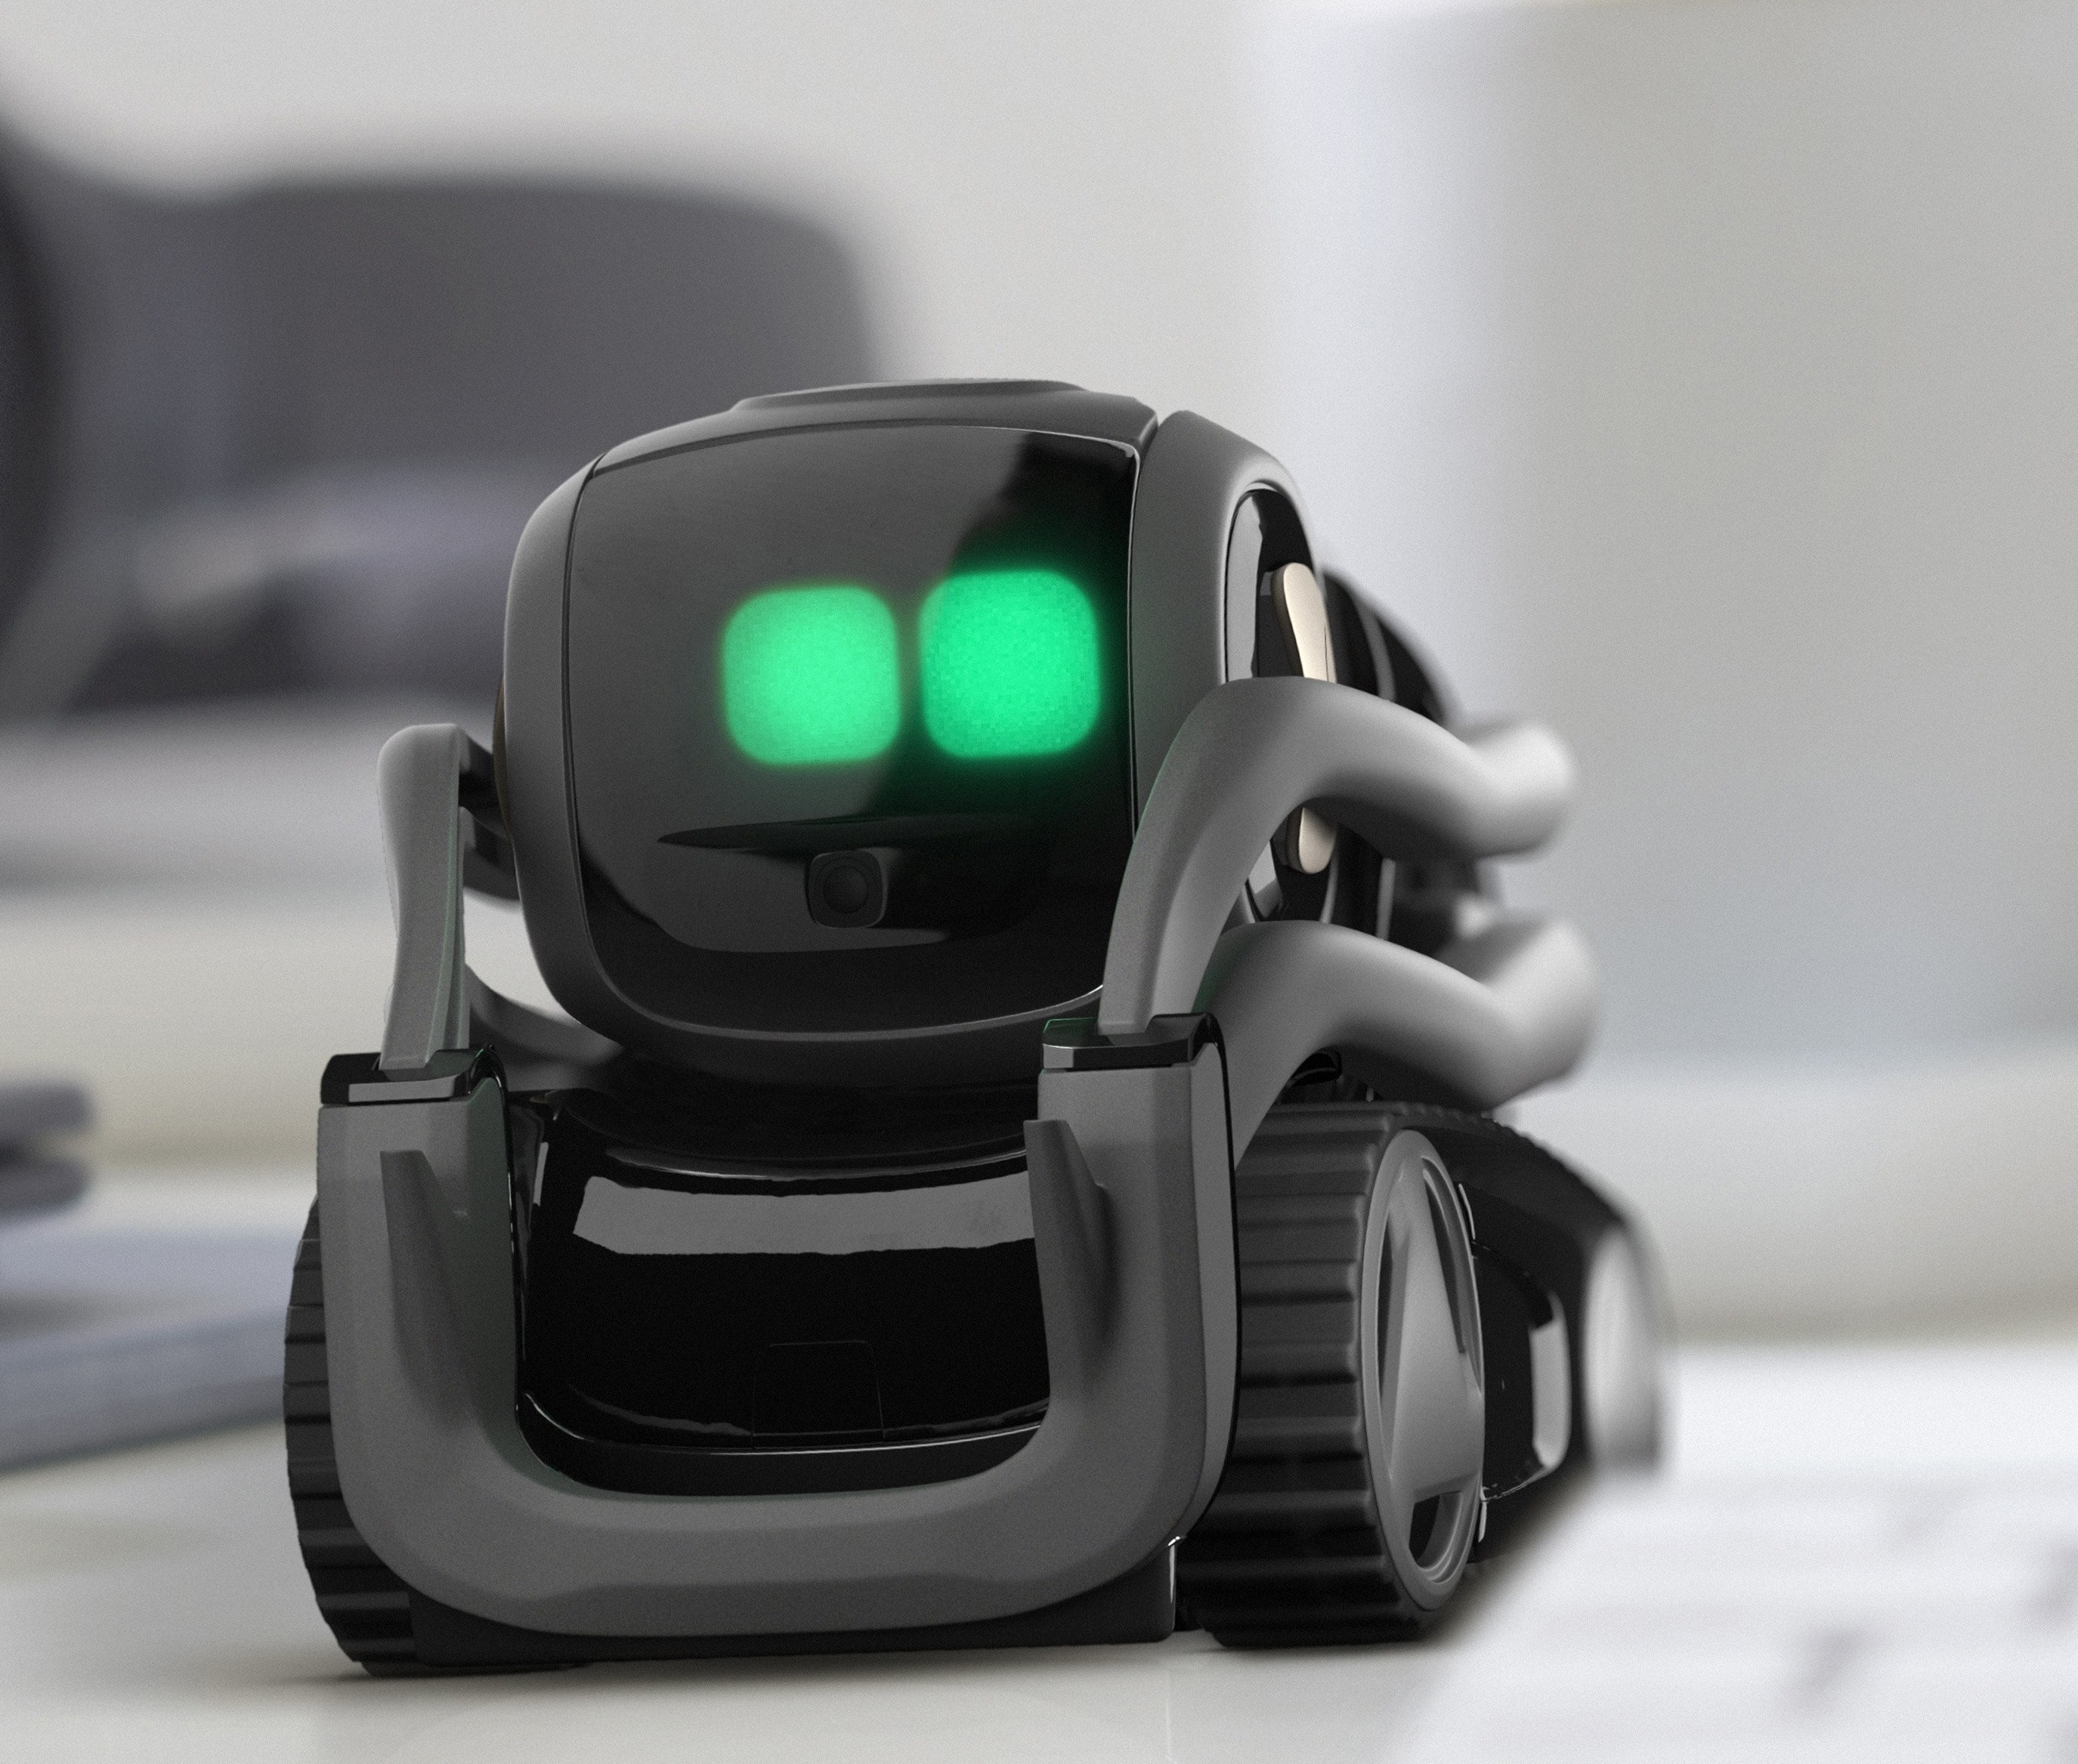 The new Anki Vector robot is smart enough to just hang out - The Verge